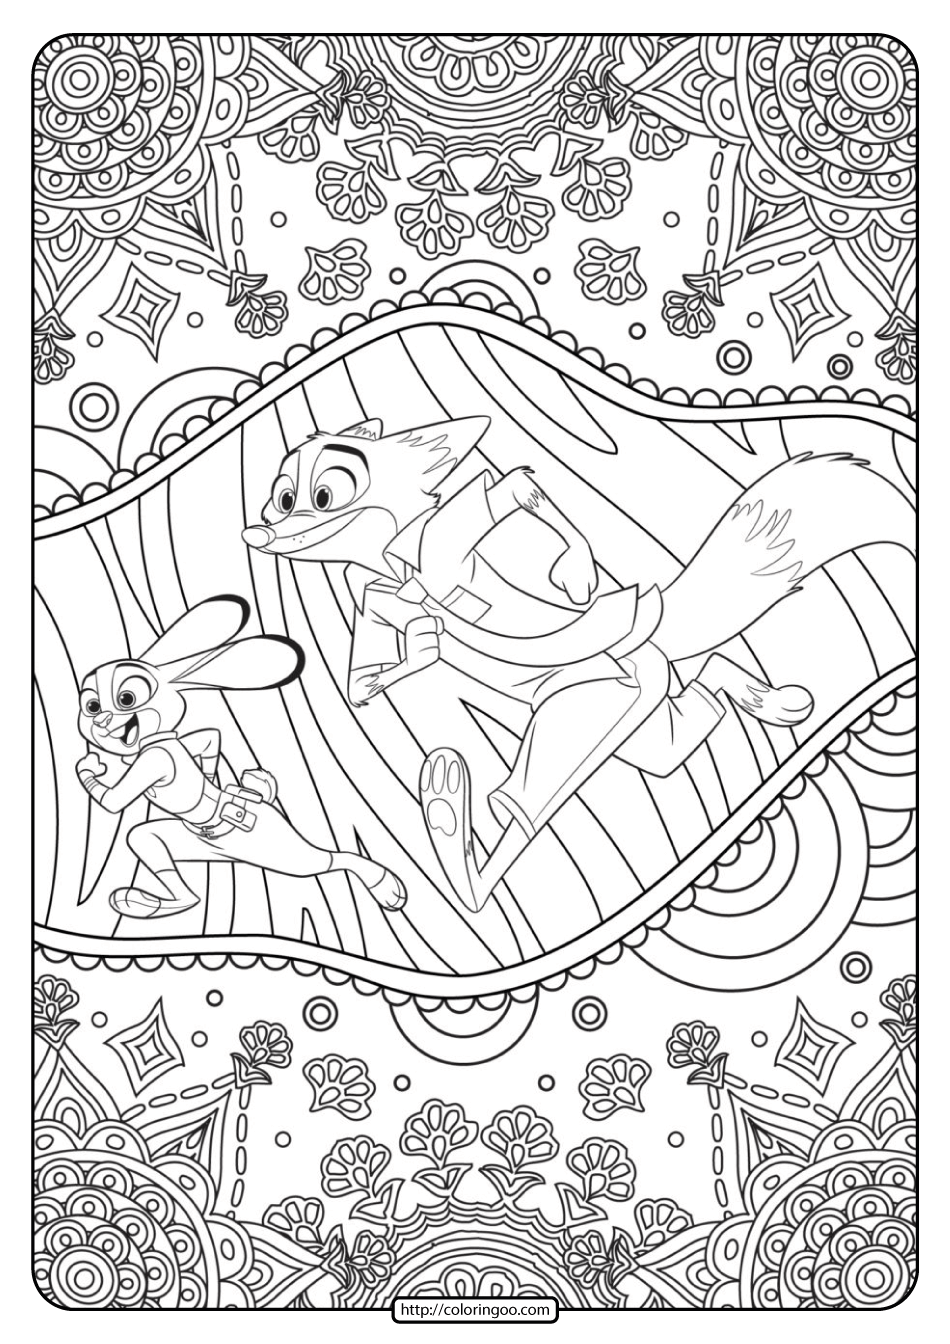 Zootopia Judy Hopps and Nick Wilde Coloring Page